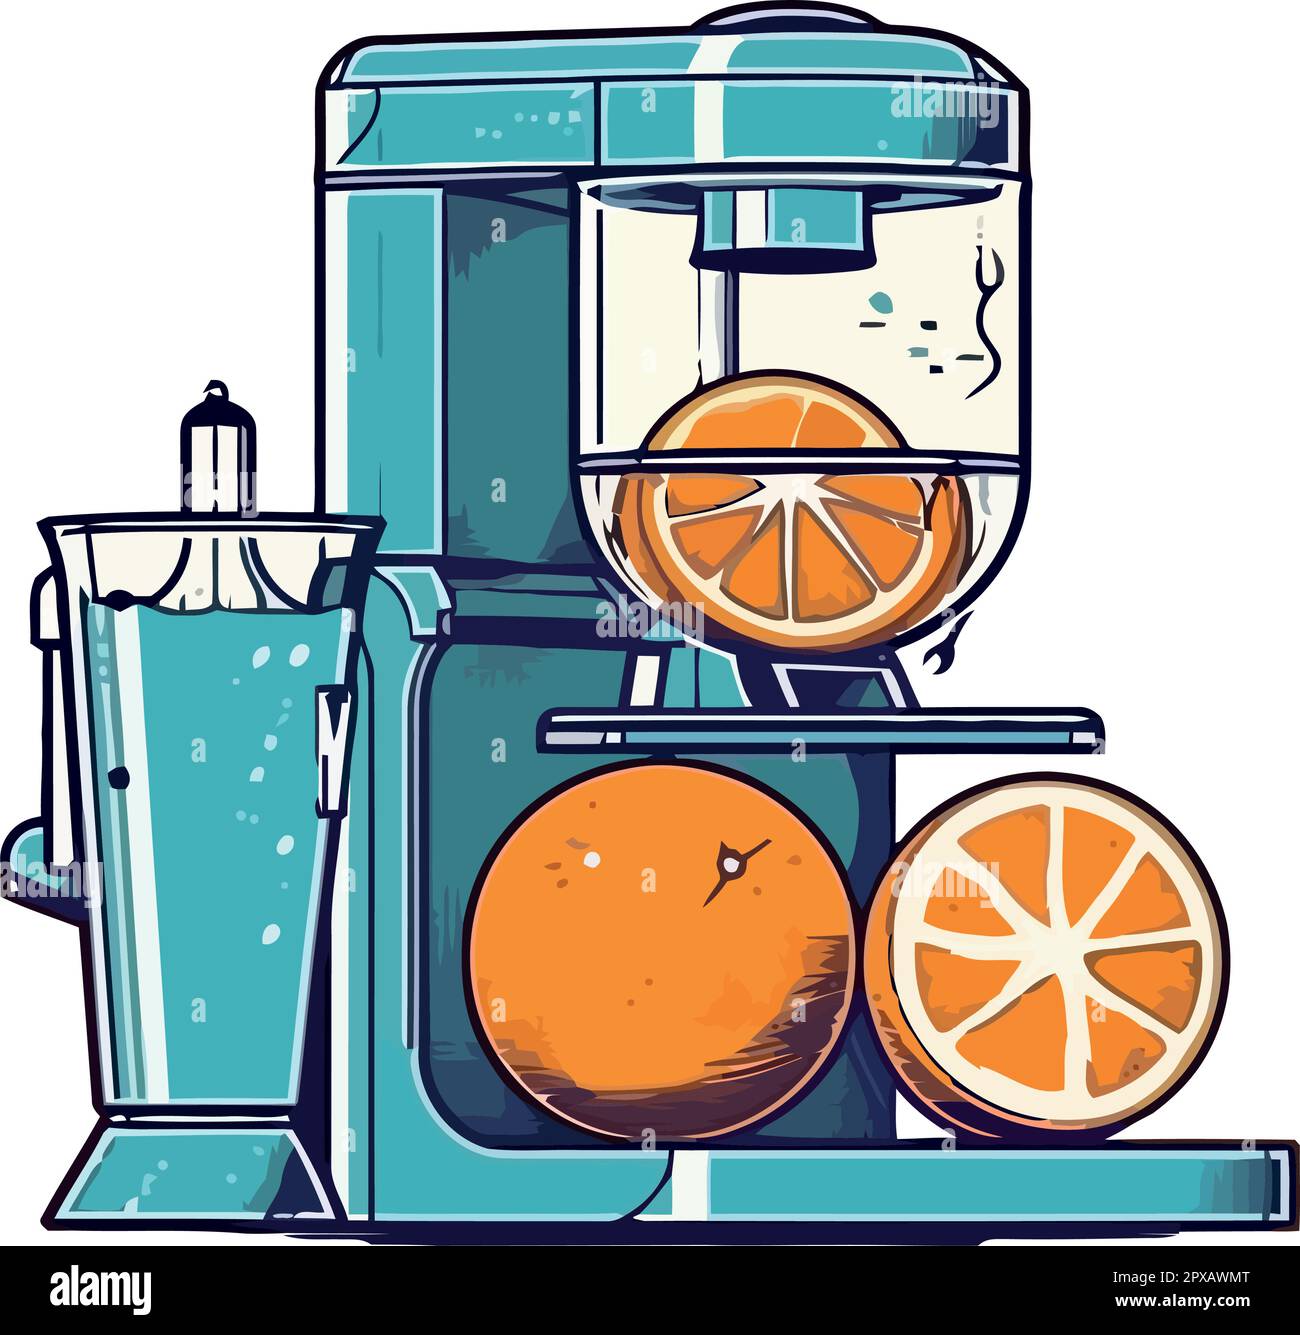 Cartoon juice blender Cut Out Stock Images & Pictures - Alamy